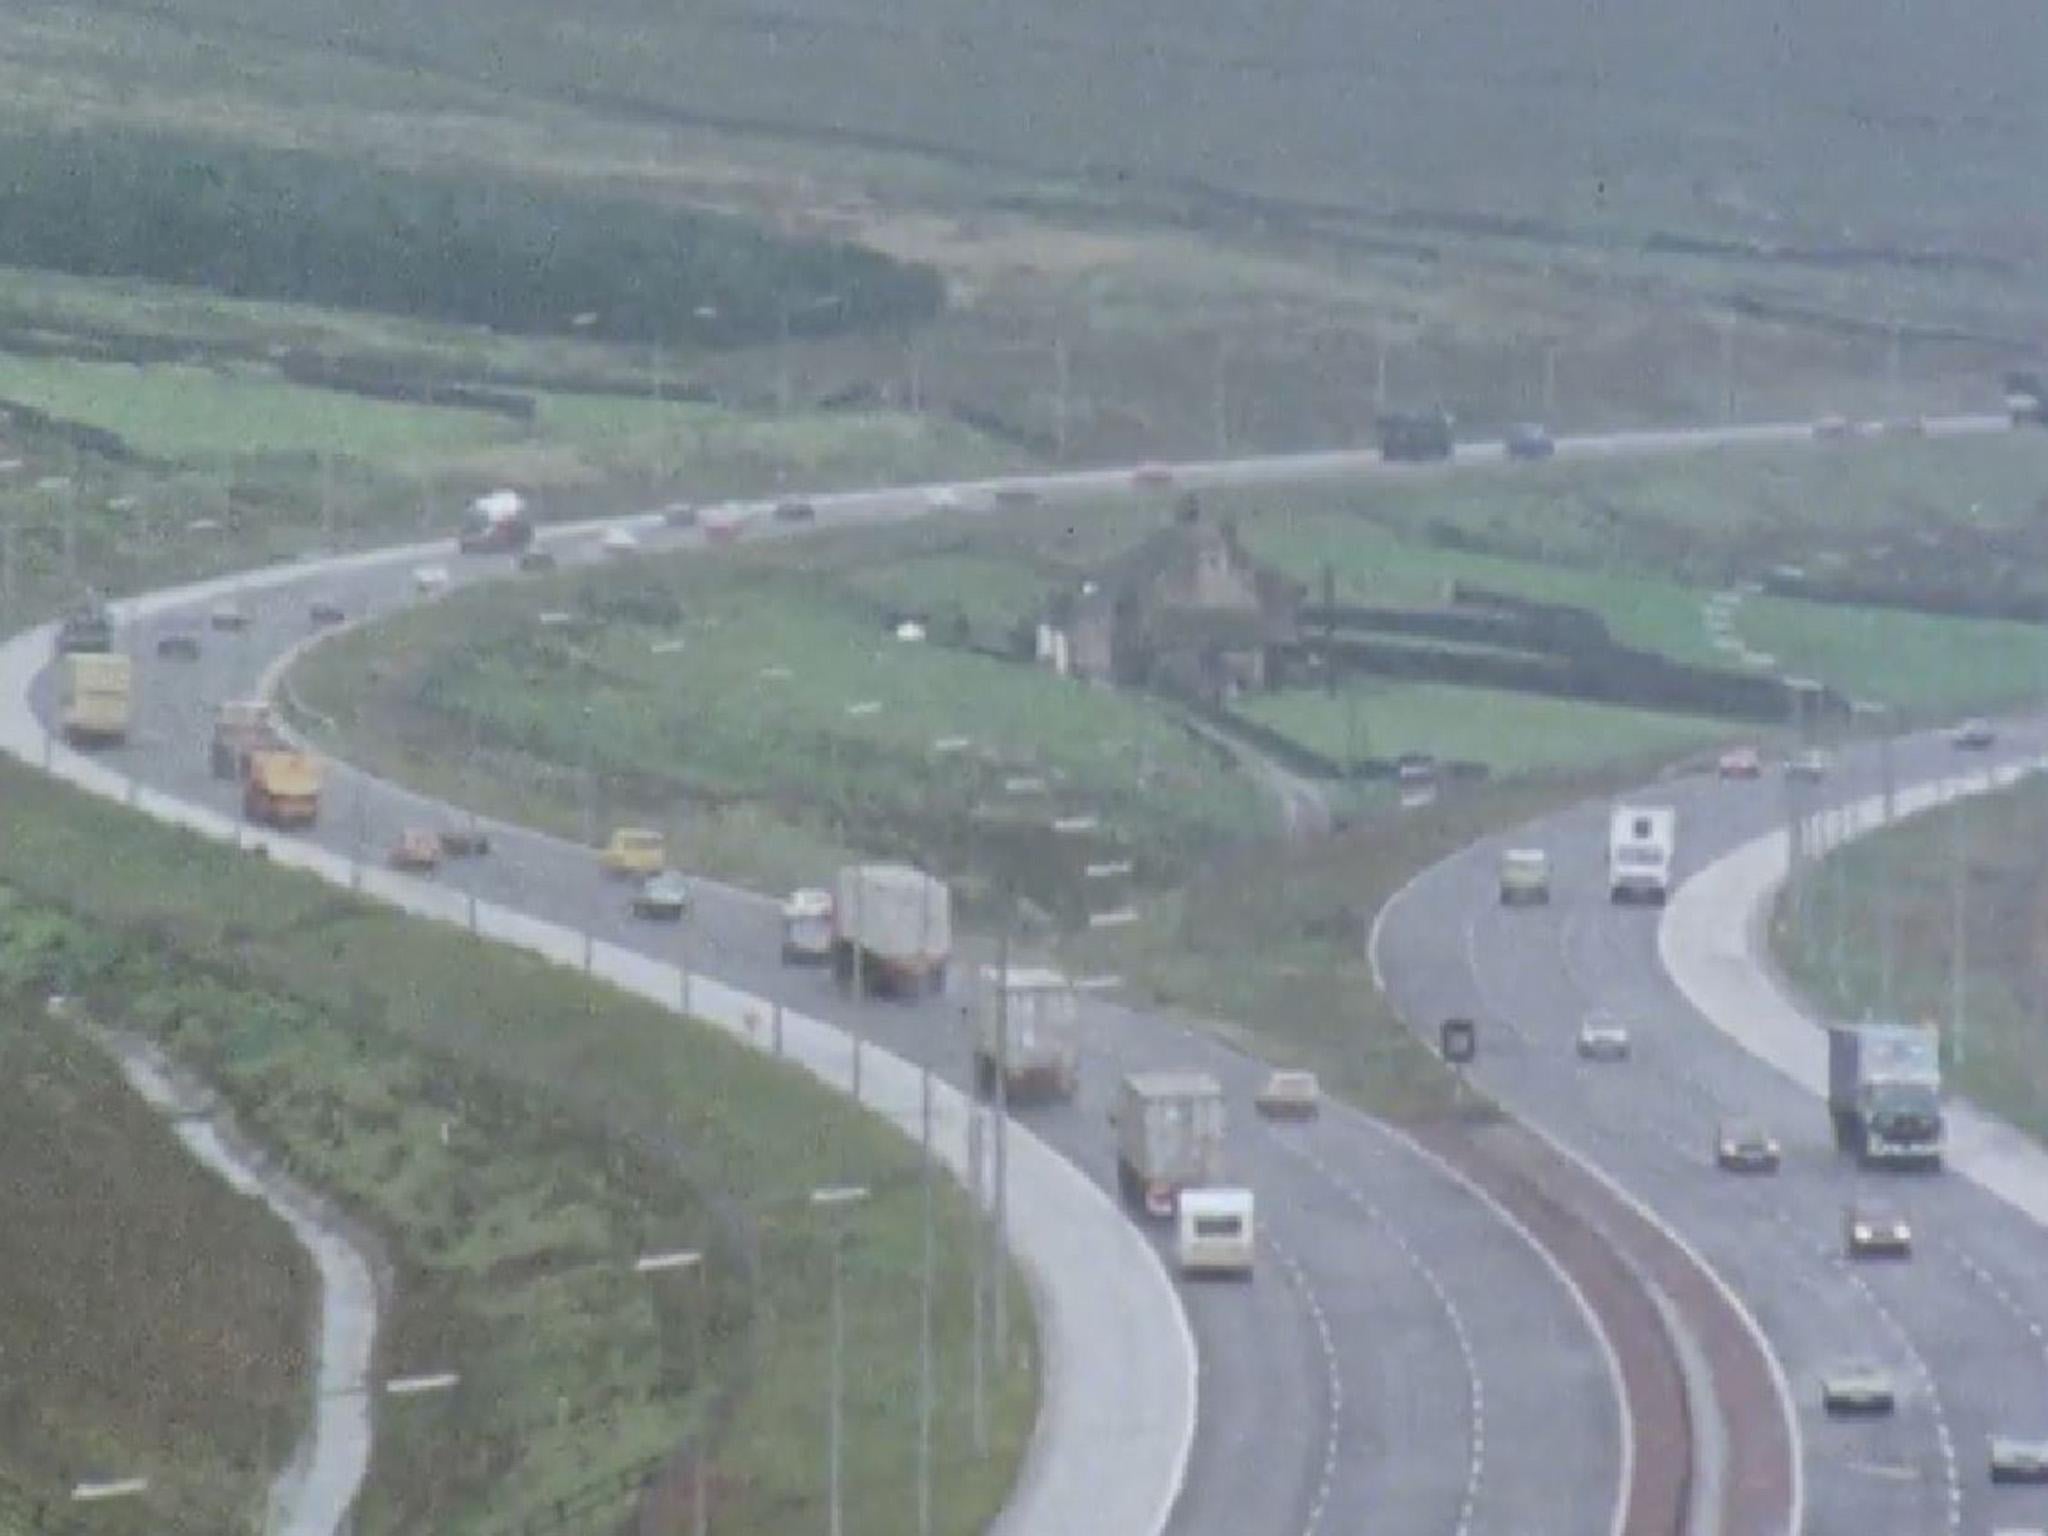 The motorway was built around Stott Hill Farm because of a geological fault underneath